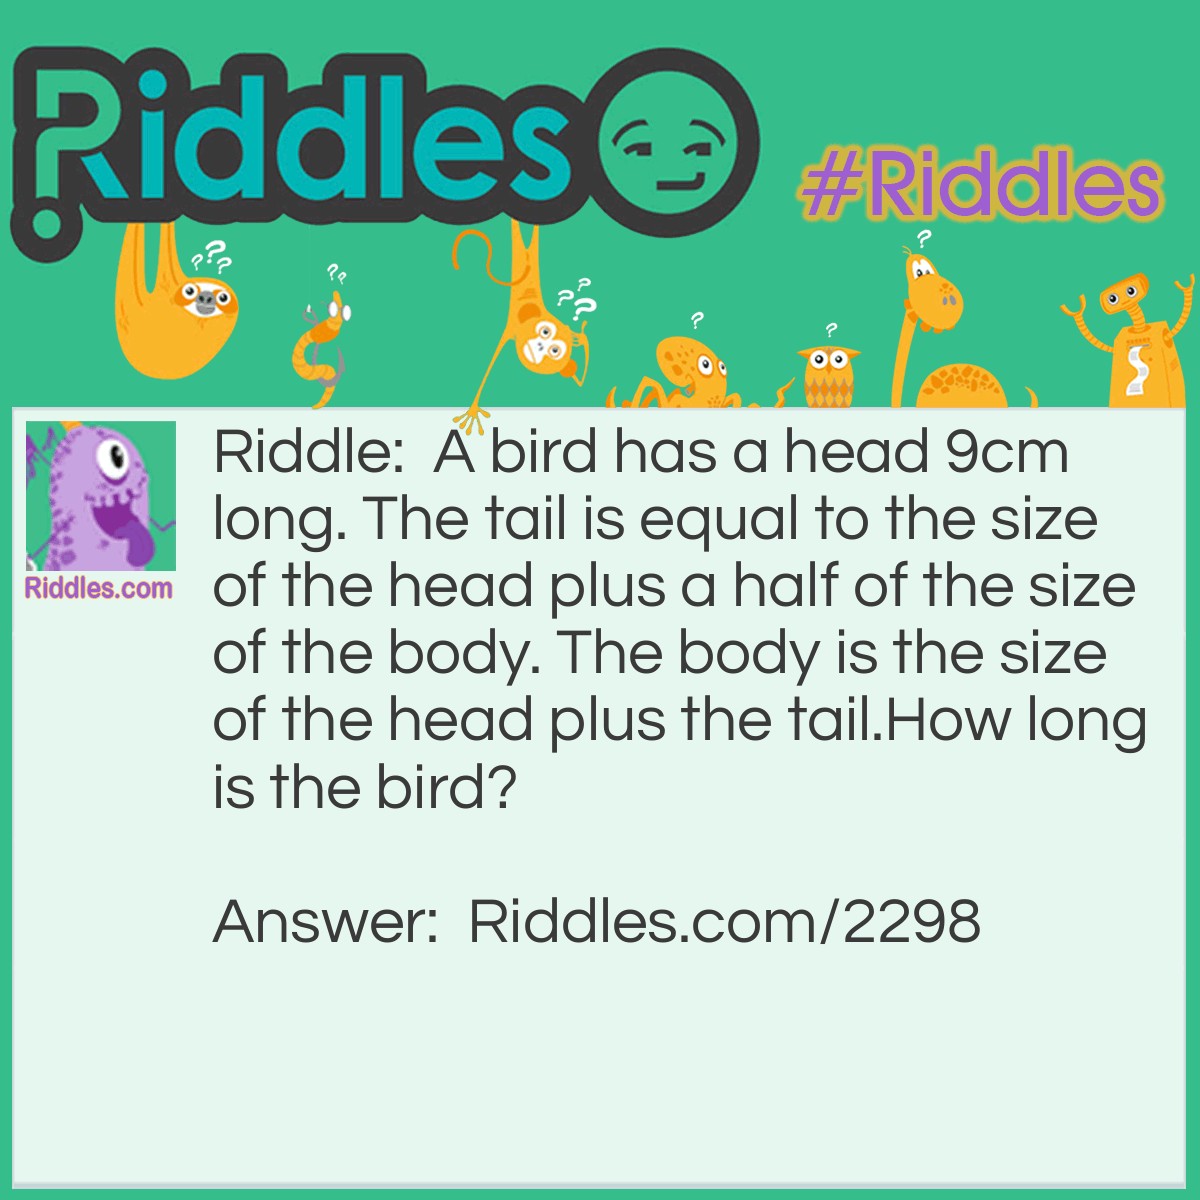 Riddle: A bird has a head 9cm long. The tail is equal to the size of the head plus a half of the size of the body. The body is the size of the head plus the tail.
How long is the bird? Answer: 72cm. Th head is 9cm. The tail is 18 + 9= 27cm. The body is 9 + 18 + 9= 36cm. 9 + 27 + 36= 72cm.